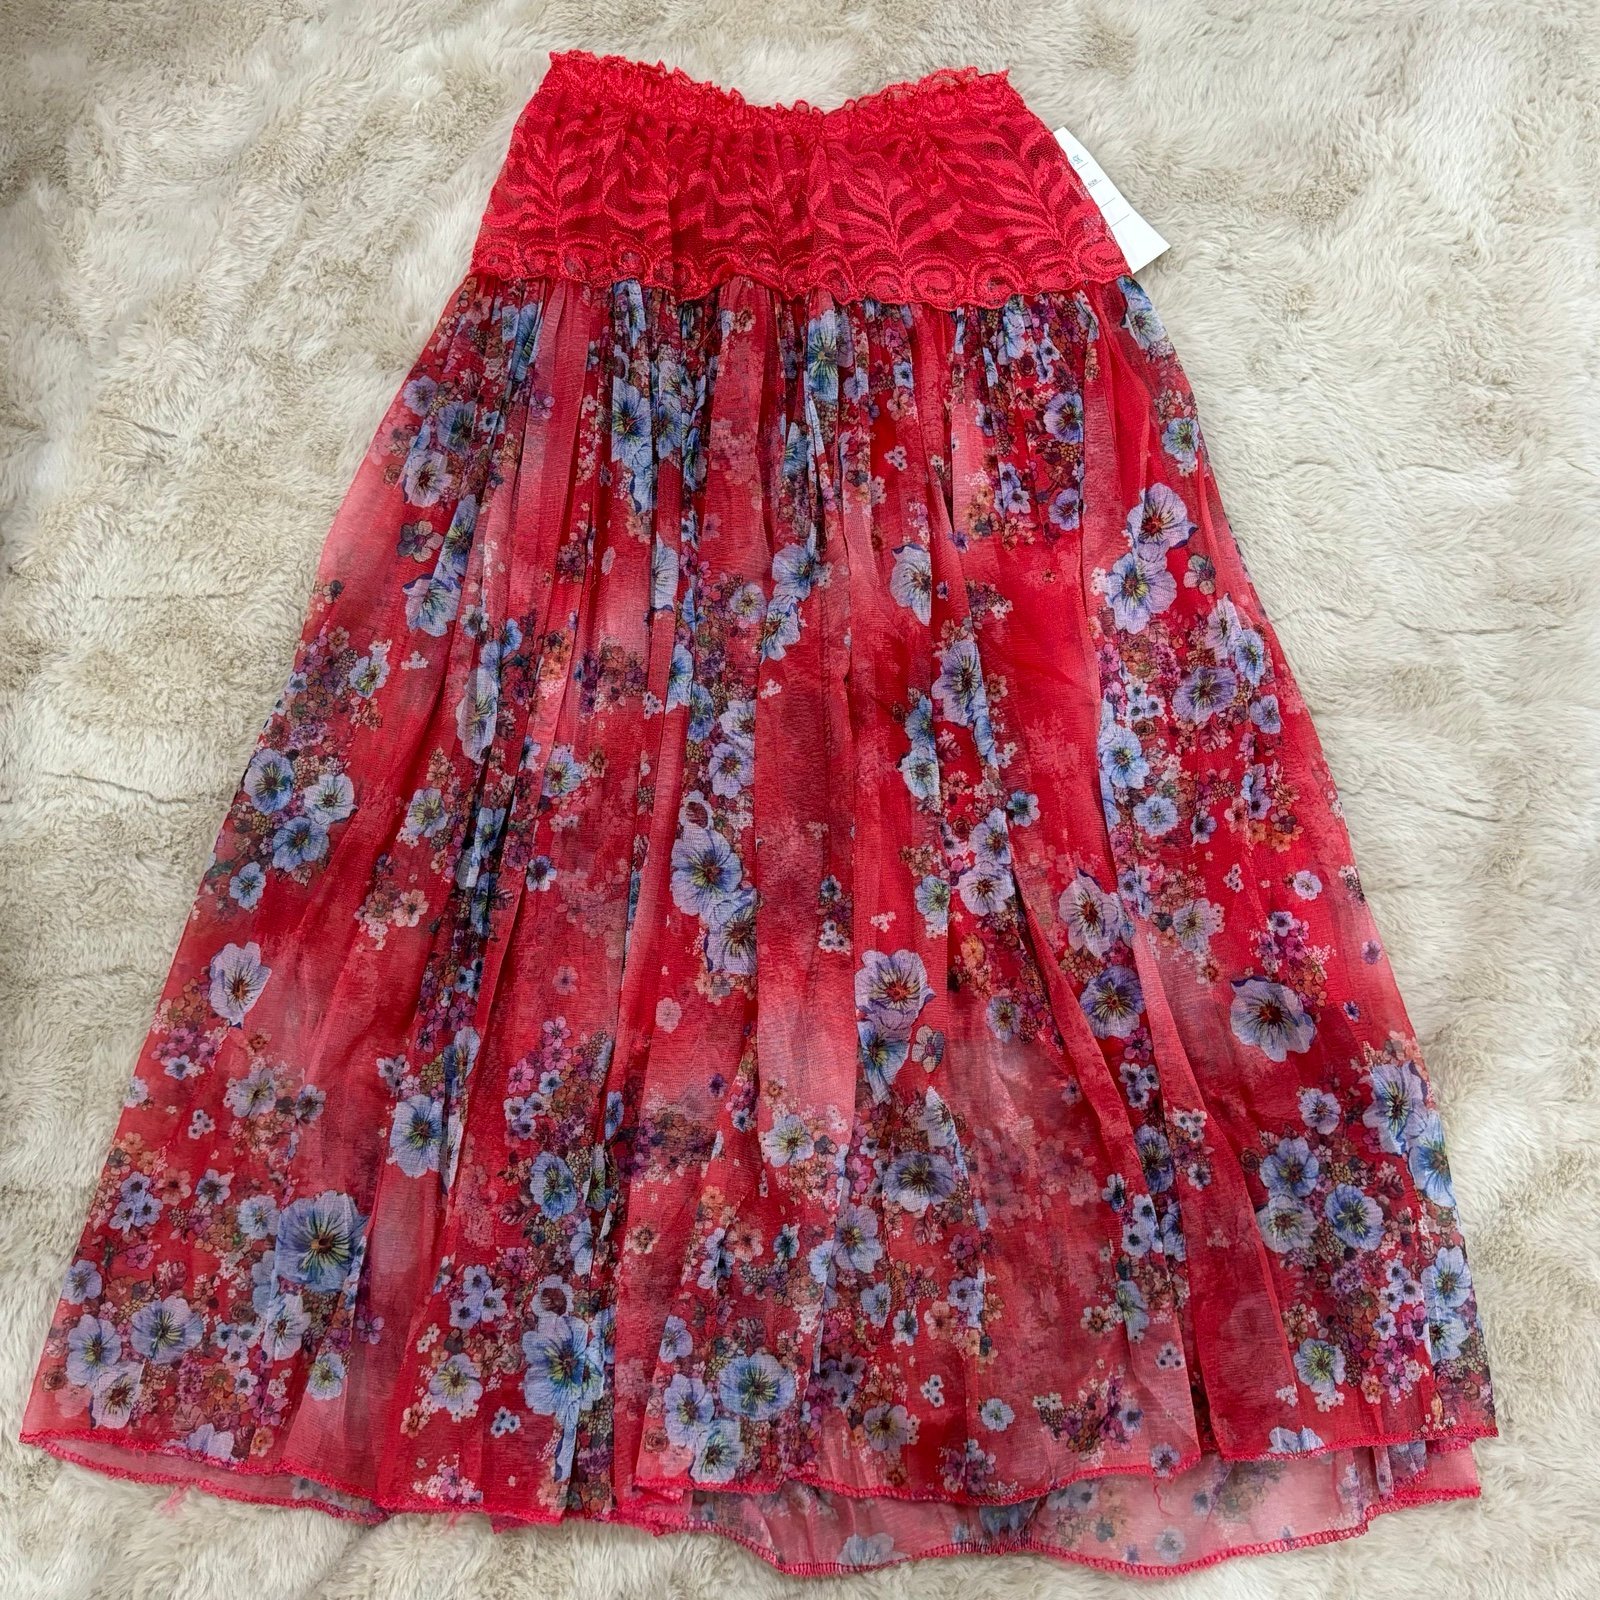 Amazing Floral print mid length skirt red color with me